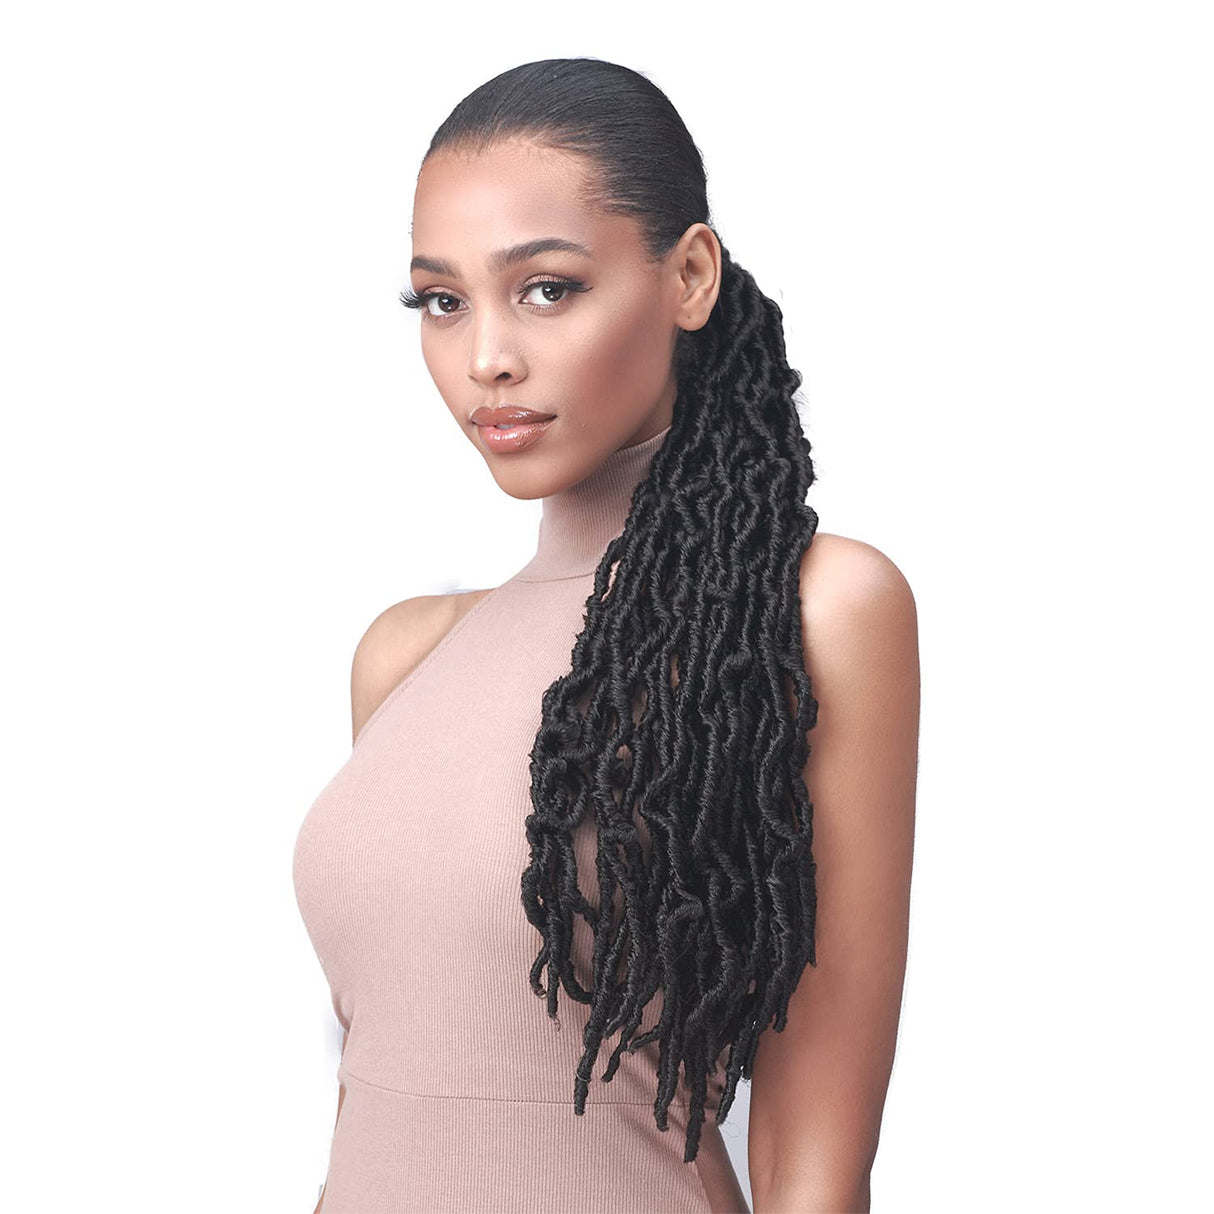 BOBBI BOSS Human Hair Blend Tress Up Ponytail MOD040 Nu Locs 24 inch (1) Find Your New Look Today!